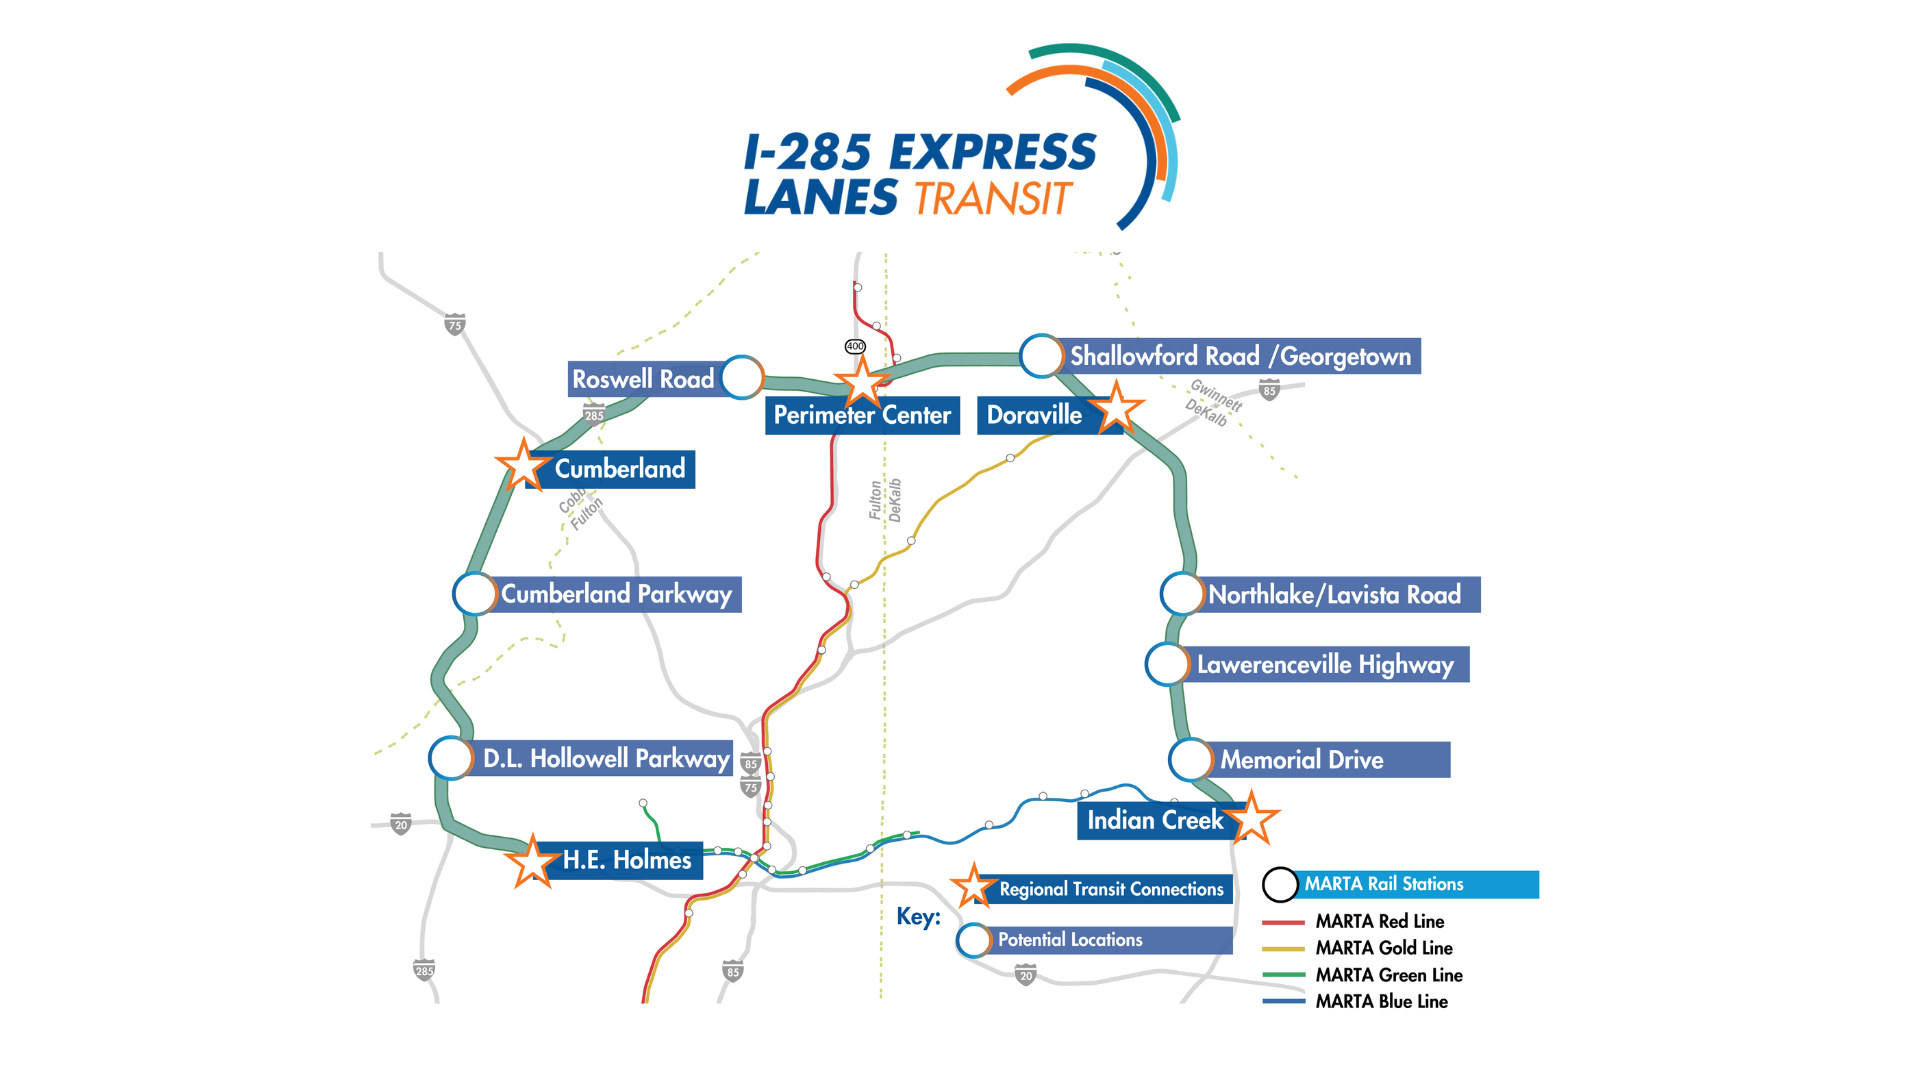 Make your voice heard with the I-285 Express Lanes Transit Study!